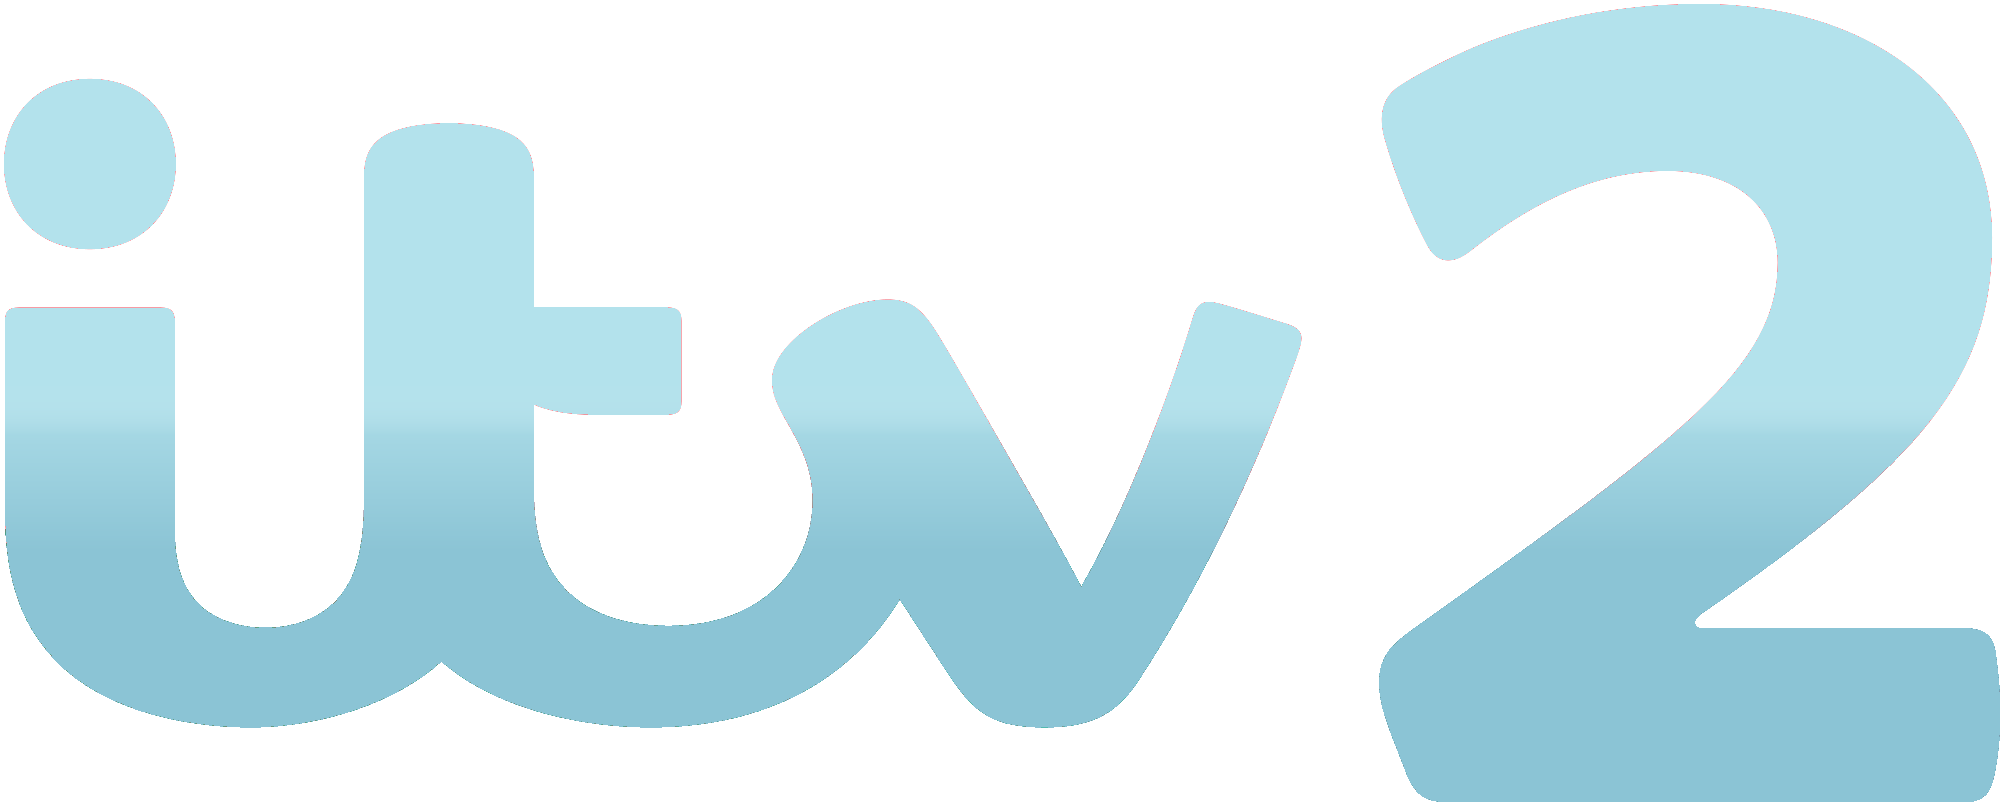 Image   Itv2 2015 Blue Colored Gradient.png | Logopedia | Fandom Powered By Wikia - Itv2, Transparent background PNG HD thumbnail